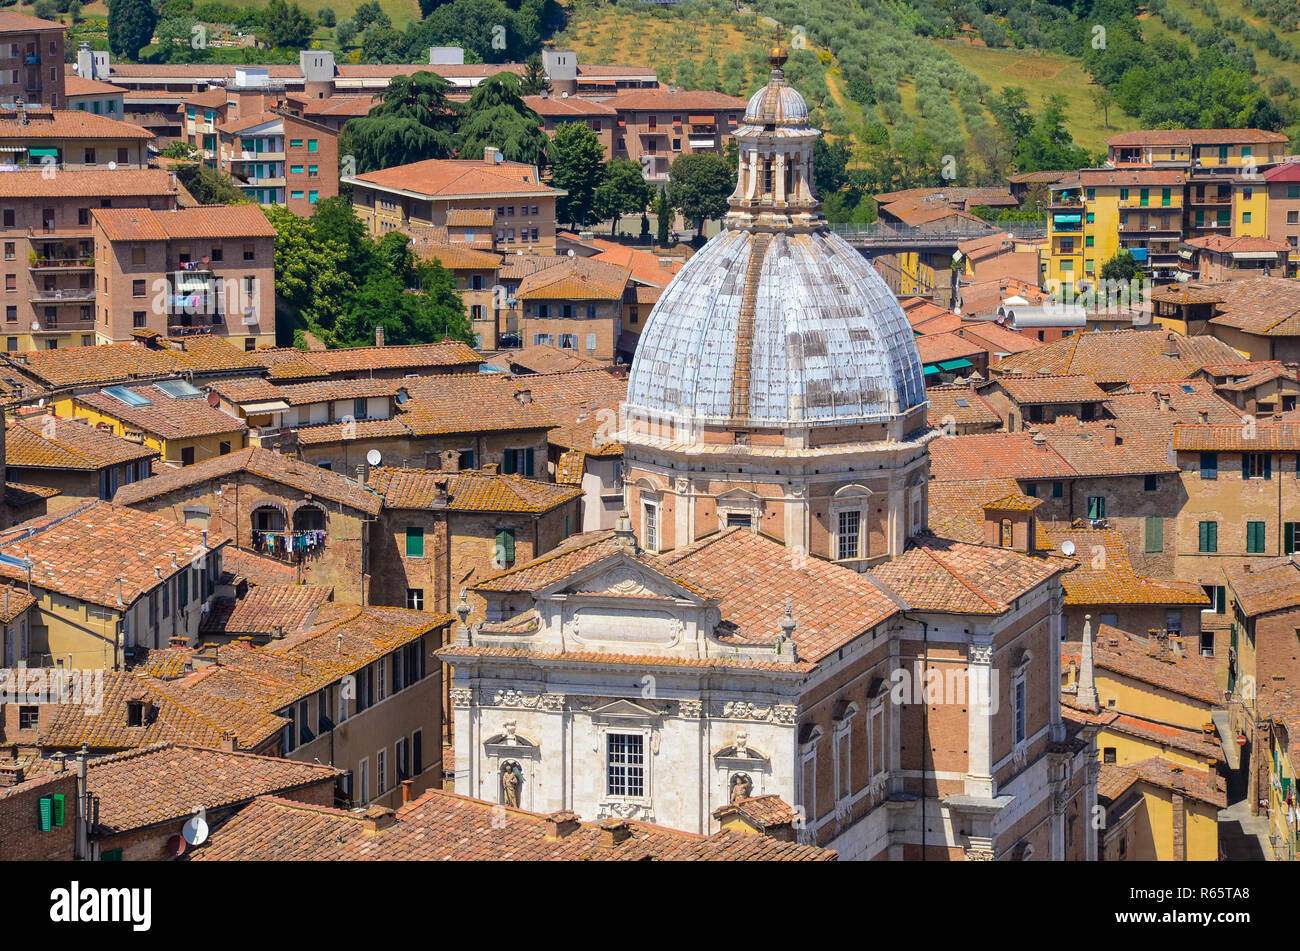 Rooftop view of colorful buildings in Siena, Italy surrounding the blue dome of the Renaissance-Baroque style church of Santa Maria in Provenzano Stock Photo